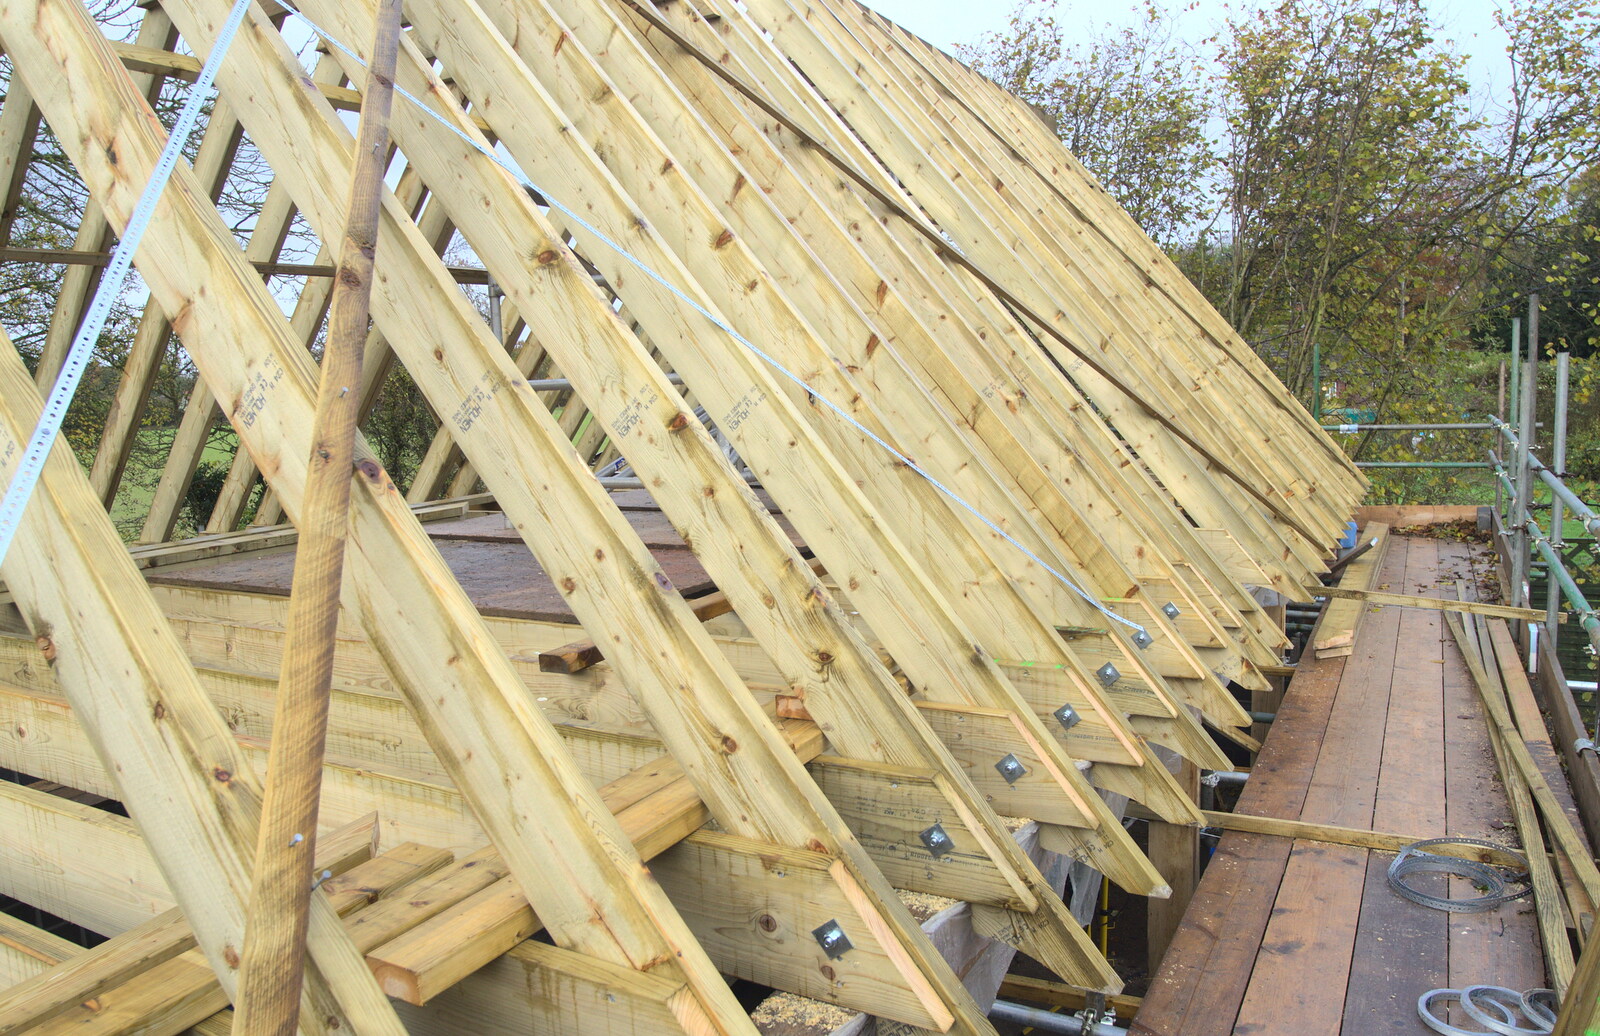 More Building and Palgrave Playground, Suffolk - 24th November 2013: The hand-cut rafters of the garage roof